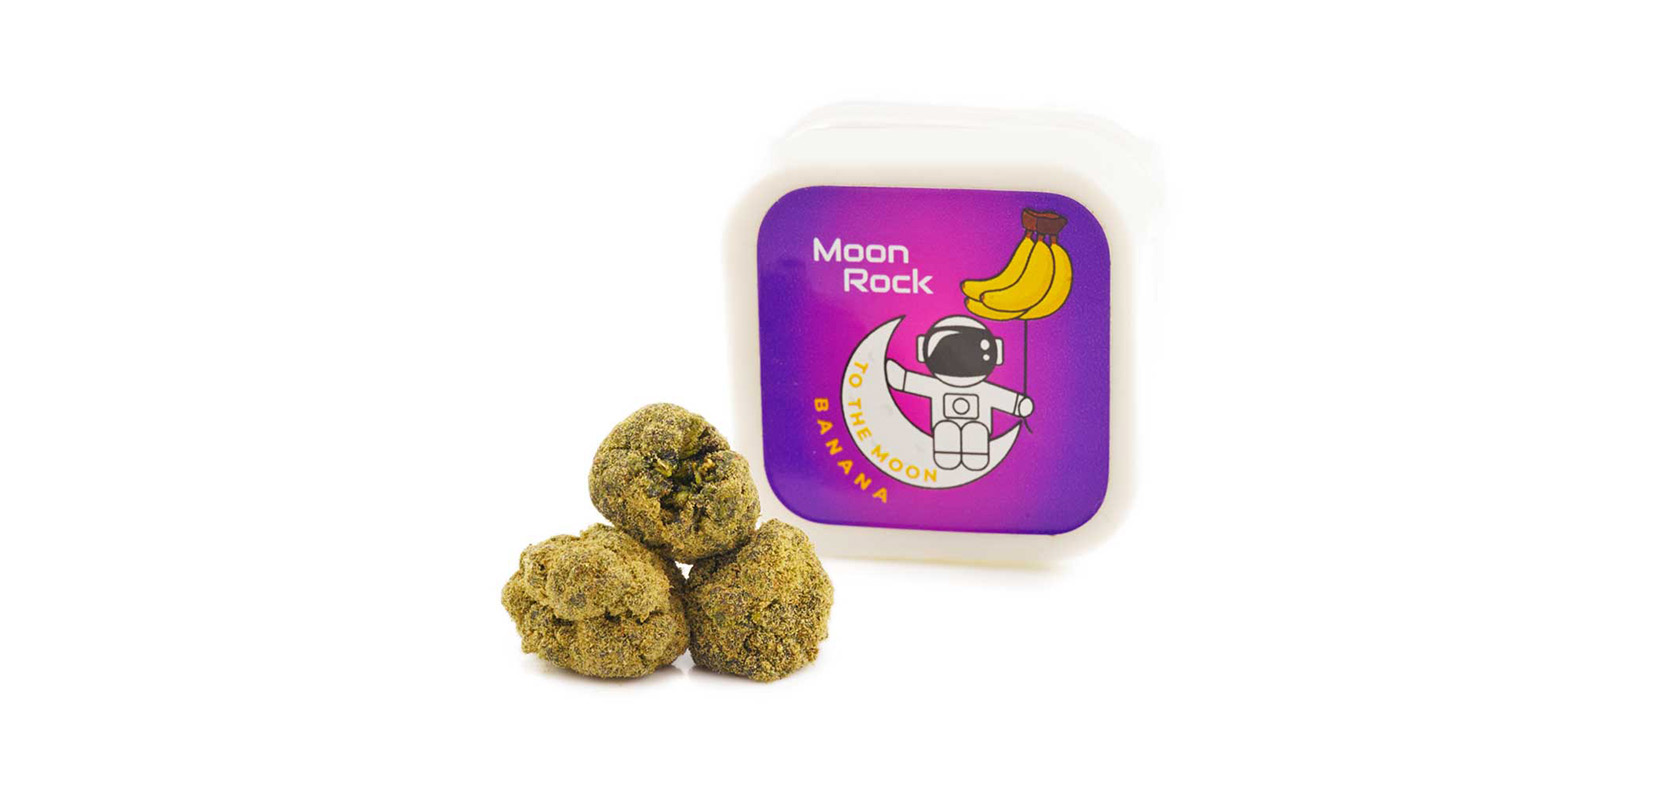 To The Moon Moon Rocks cheapweed budget buds. ontario marijuana. edibles canada. pot shop to buy weed online. Dispencary.